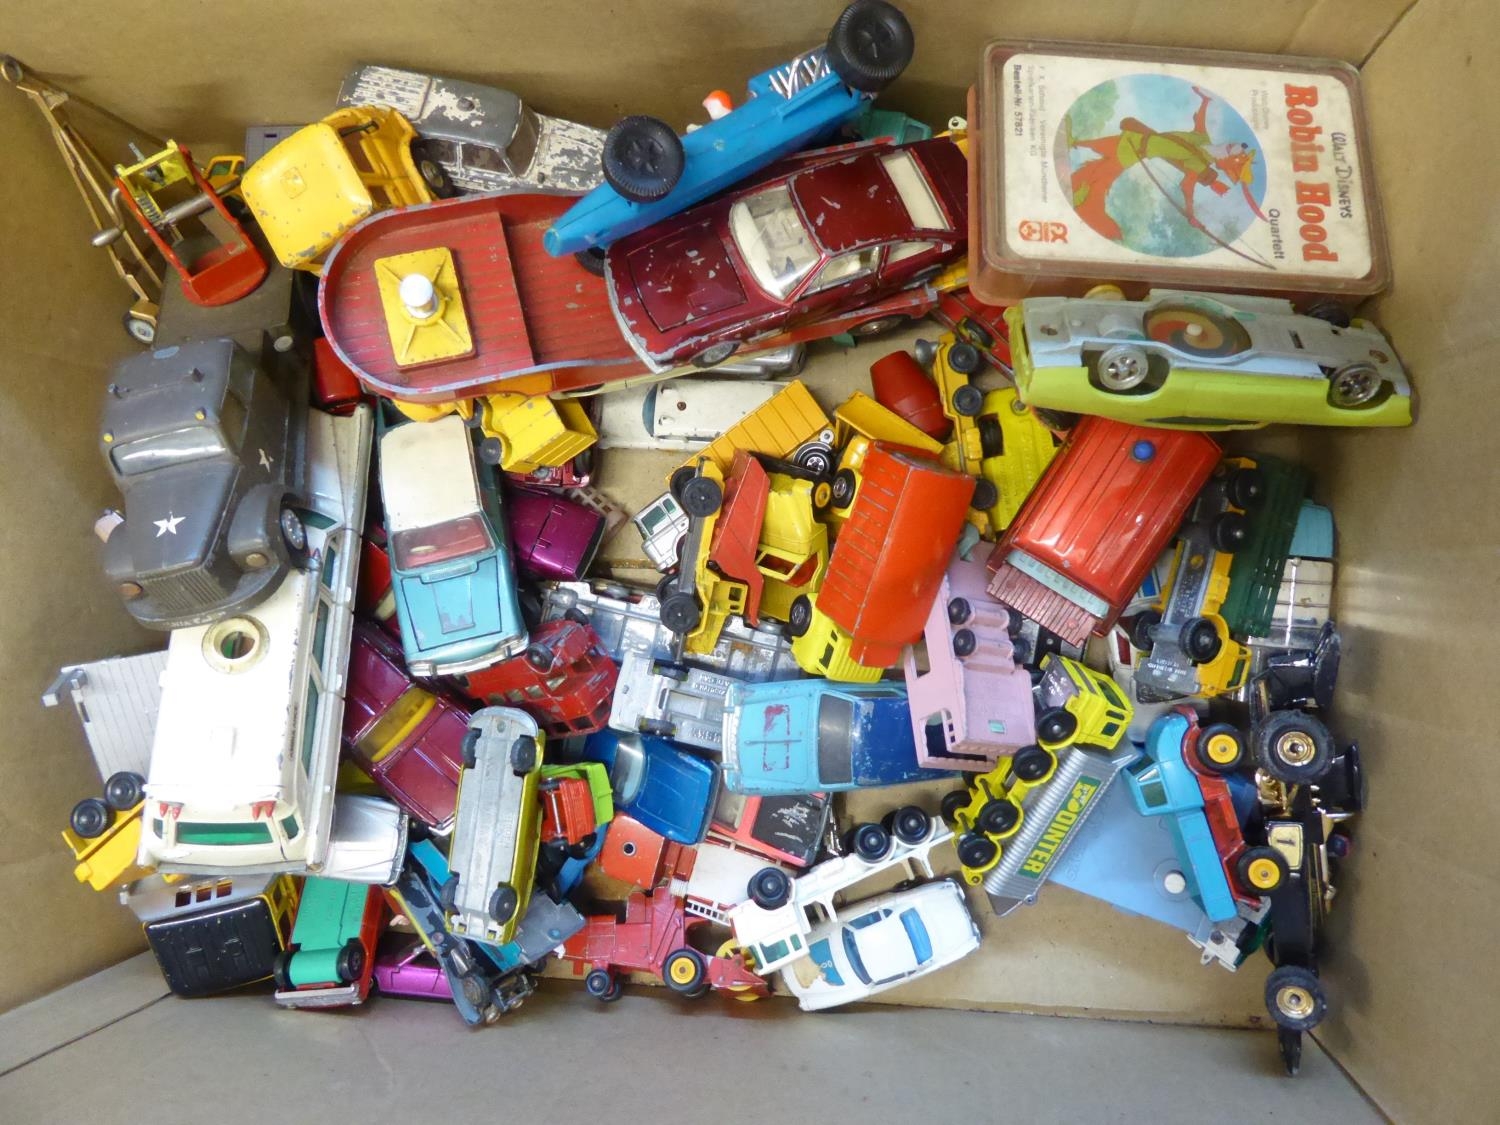 A COLLECTION OF PLAY-WORN DIE-CAST MODEL VEHICLES, INCLUDING MATCHBOX, LESNEY, CORGI, AND MORE [A